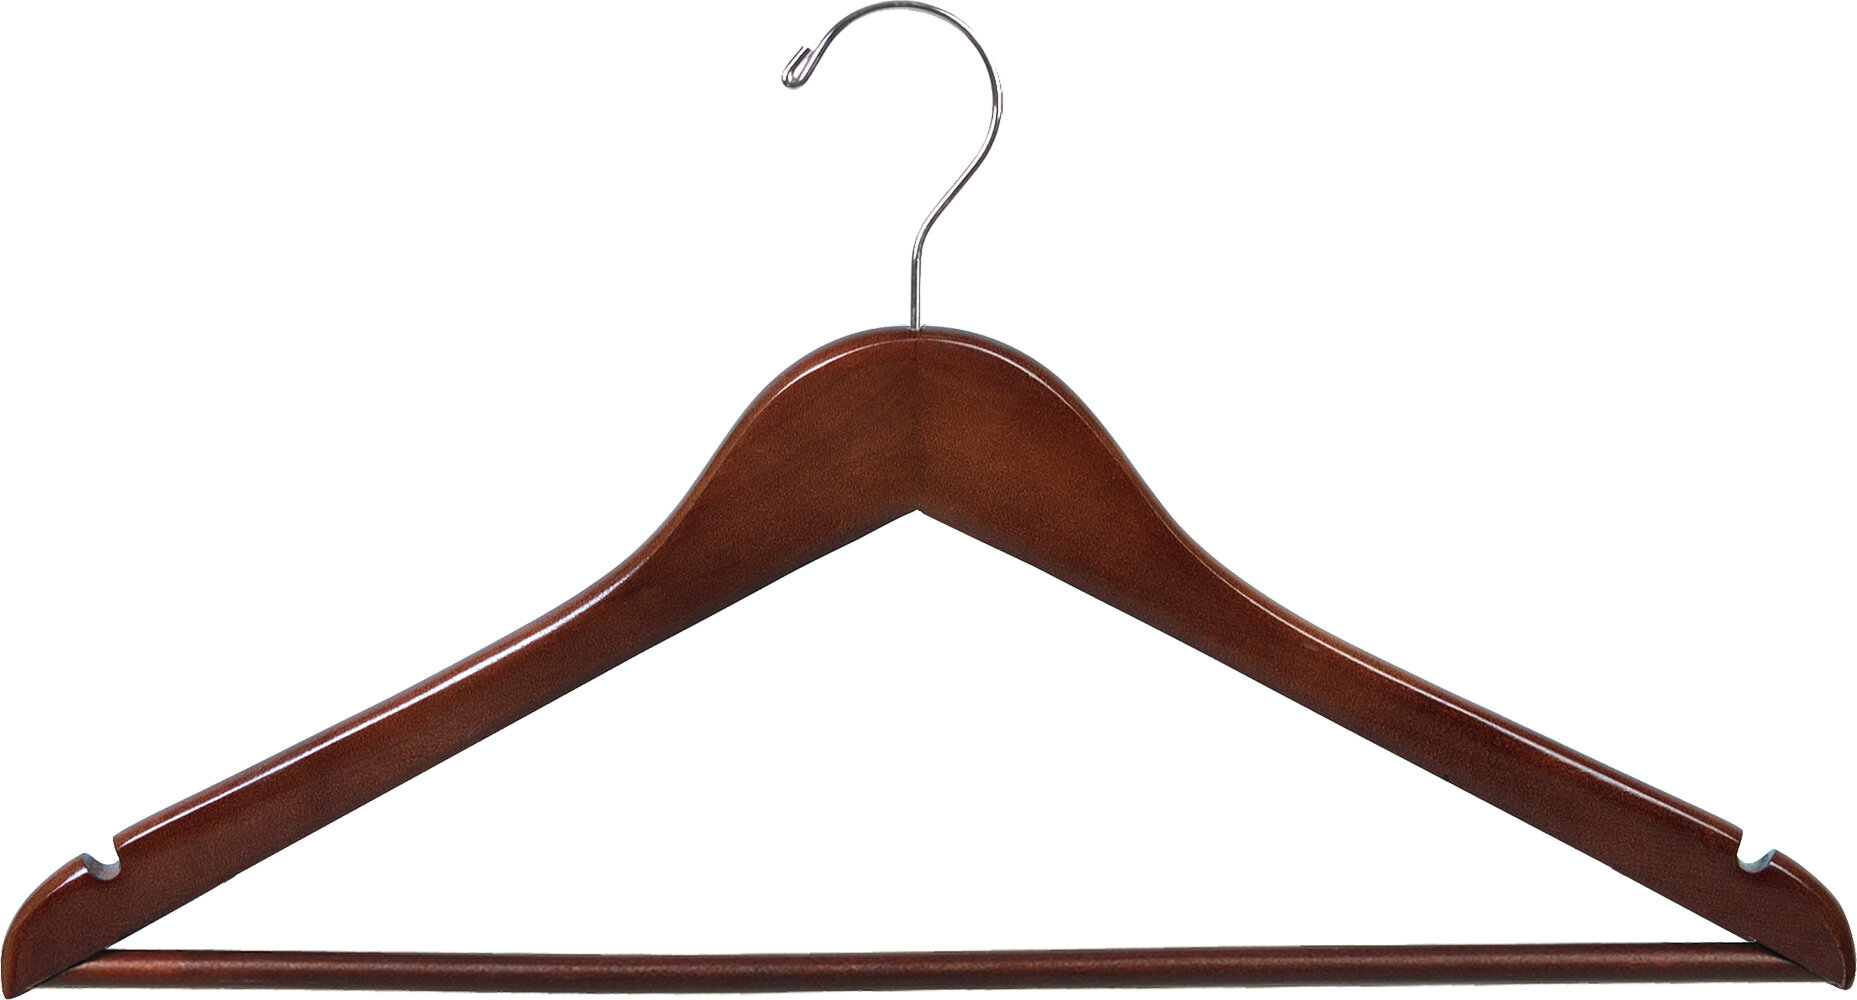 The Great American Hanger Company White Wood Top Hanger, Box of 8 Space Saving 17 inch Flat Wooden Hangers w/ Chrome Swivel Hook & Notches for Shirt